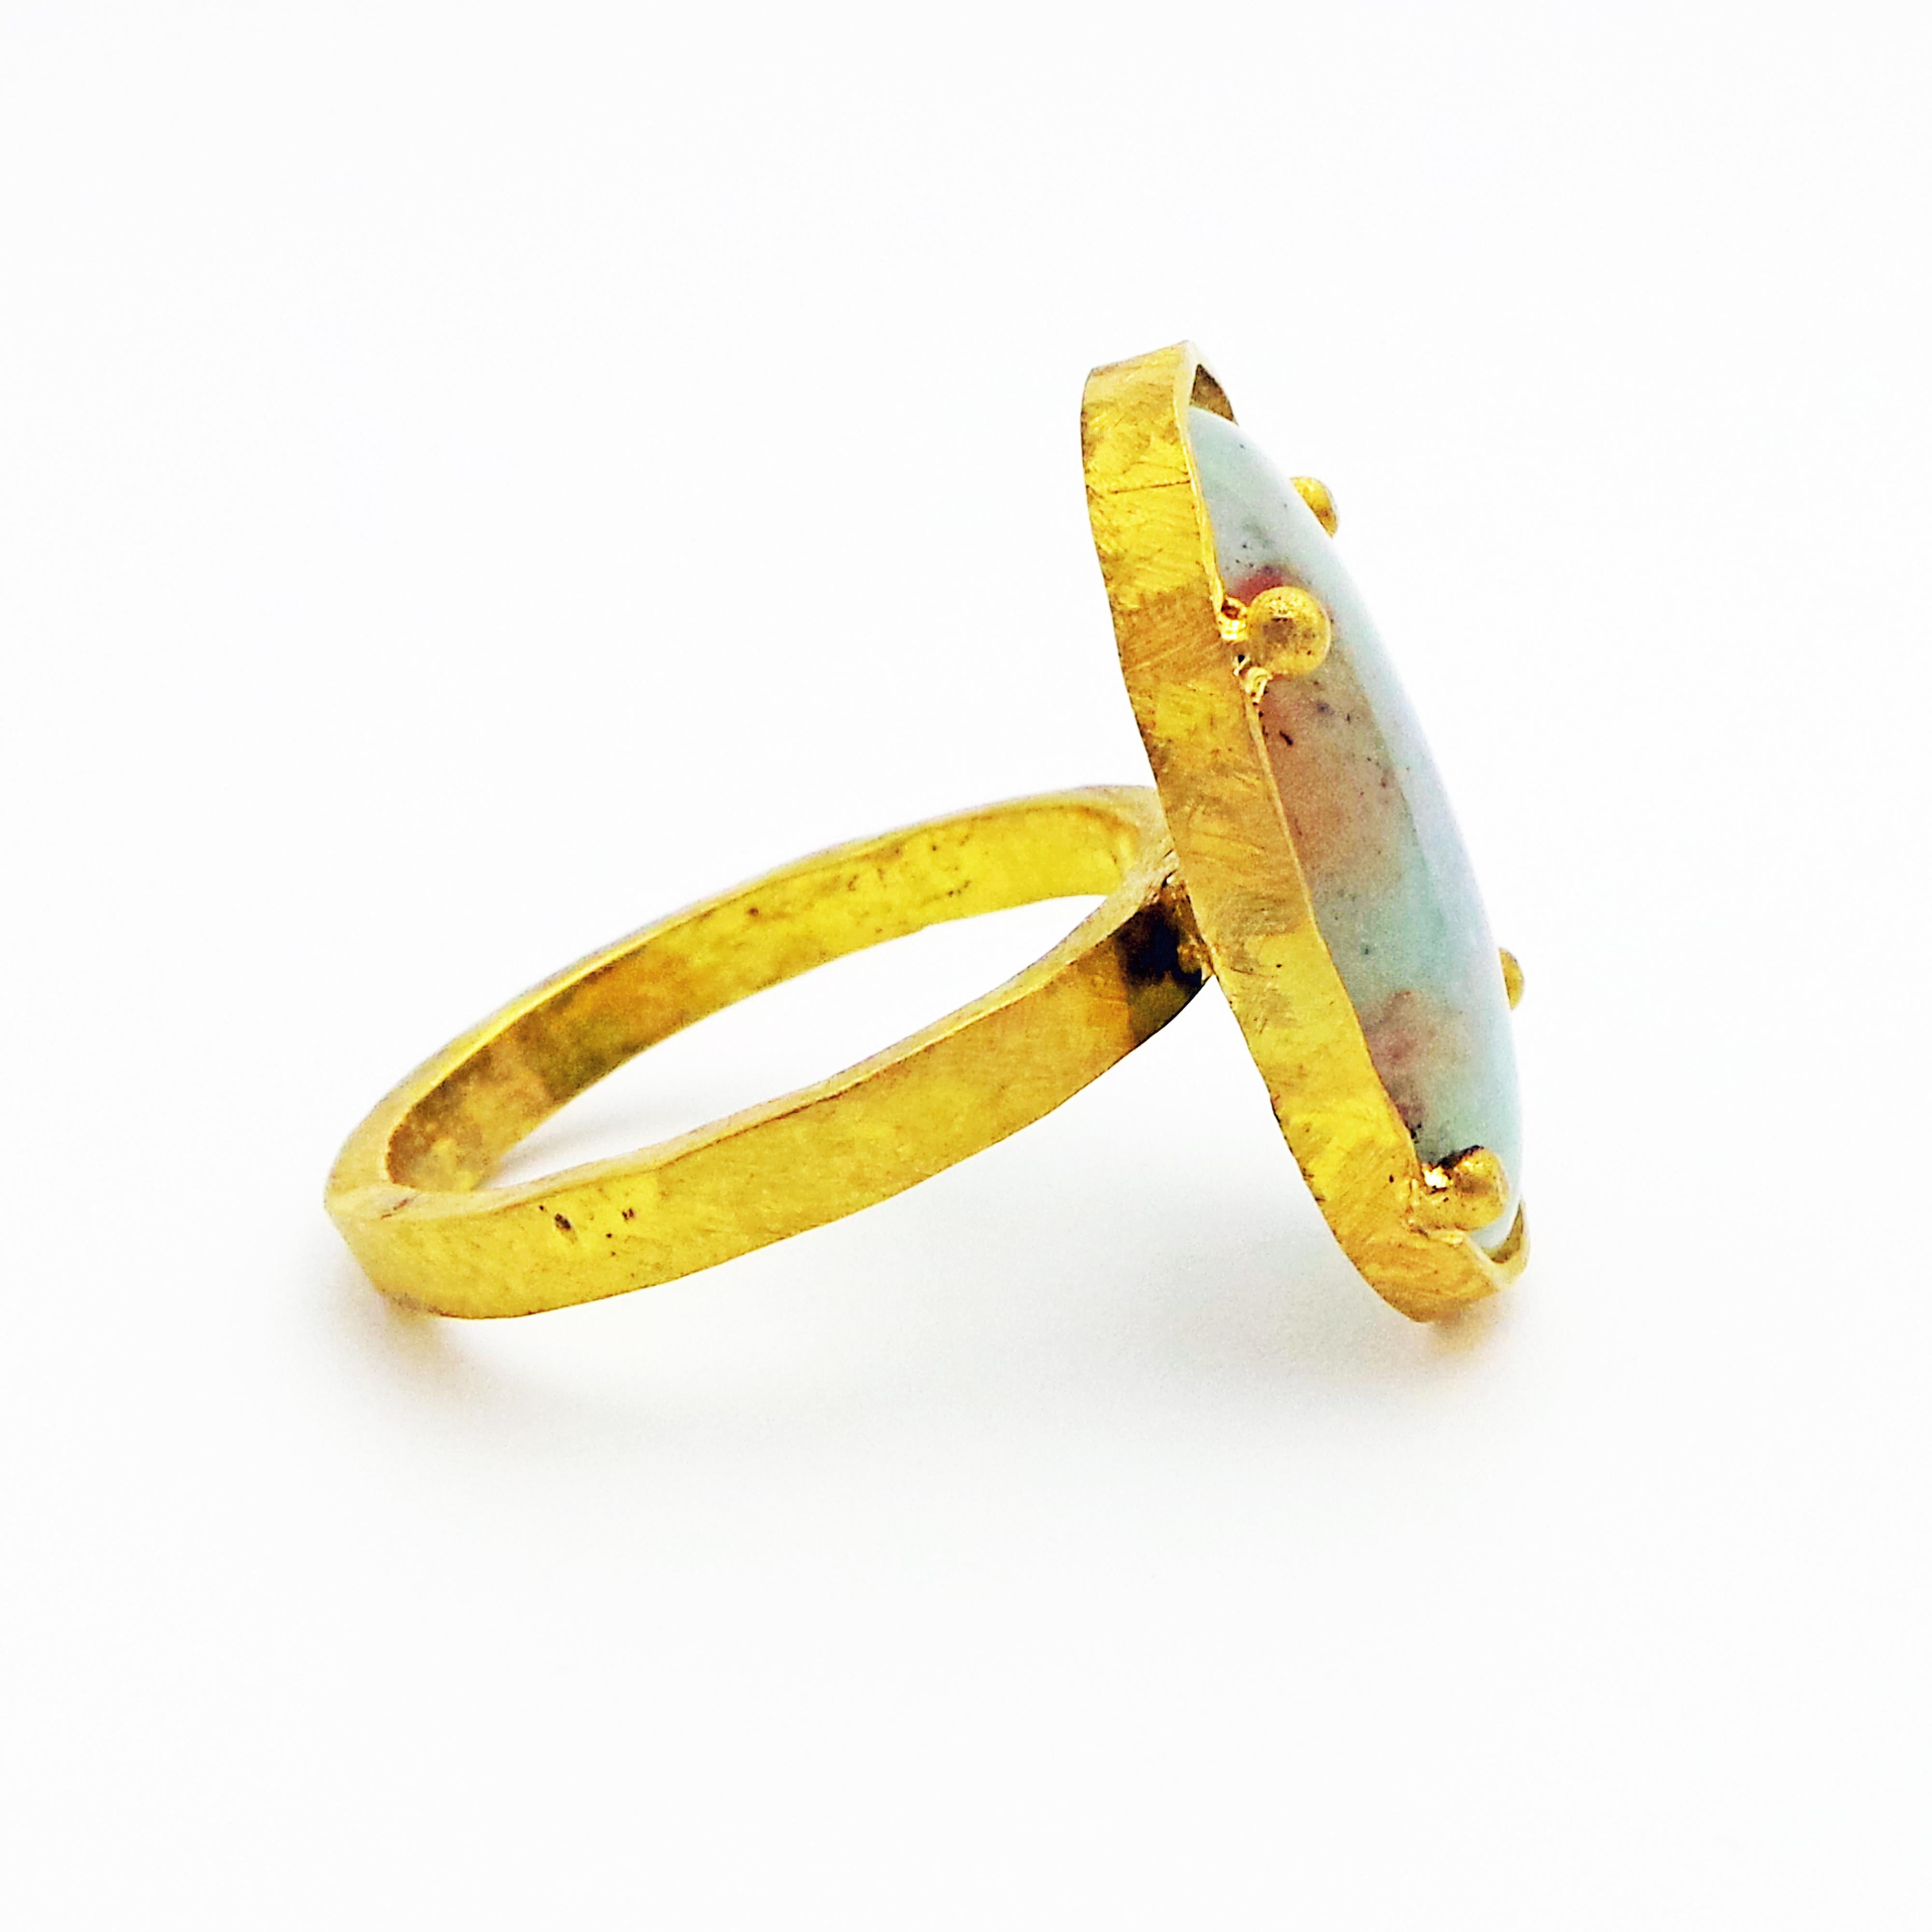 Contemporary Aquaprase and 22 Karat Gold Hand-Forged Cocktail Ring